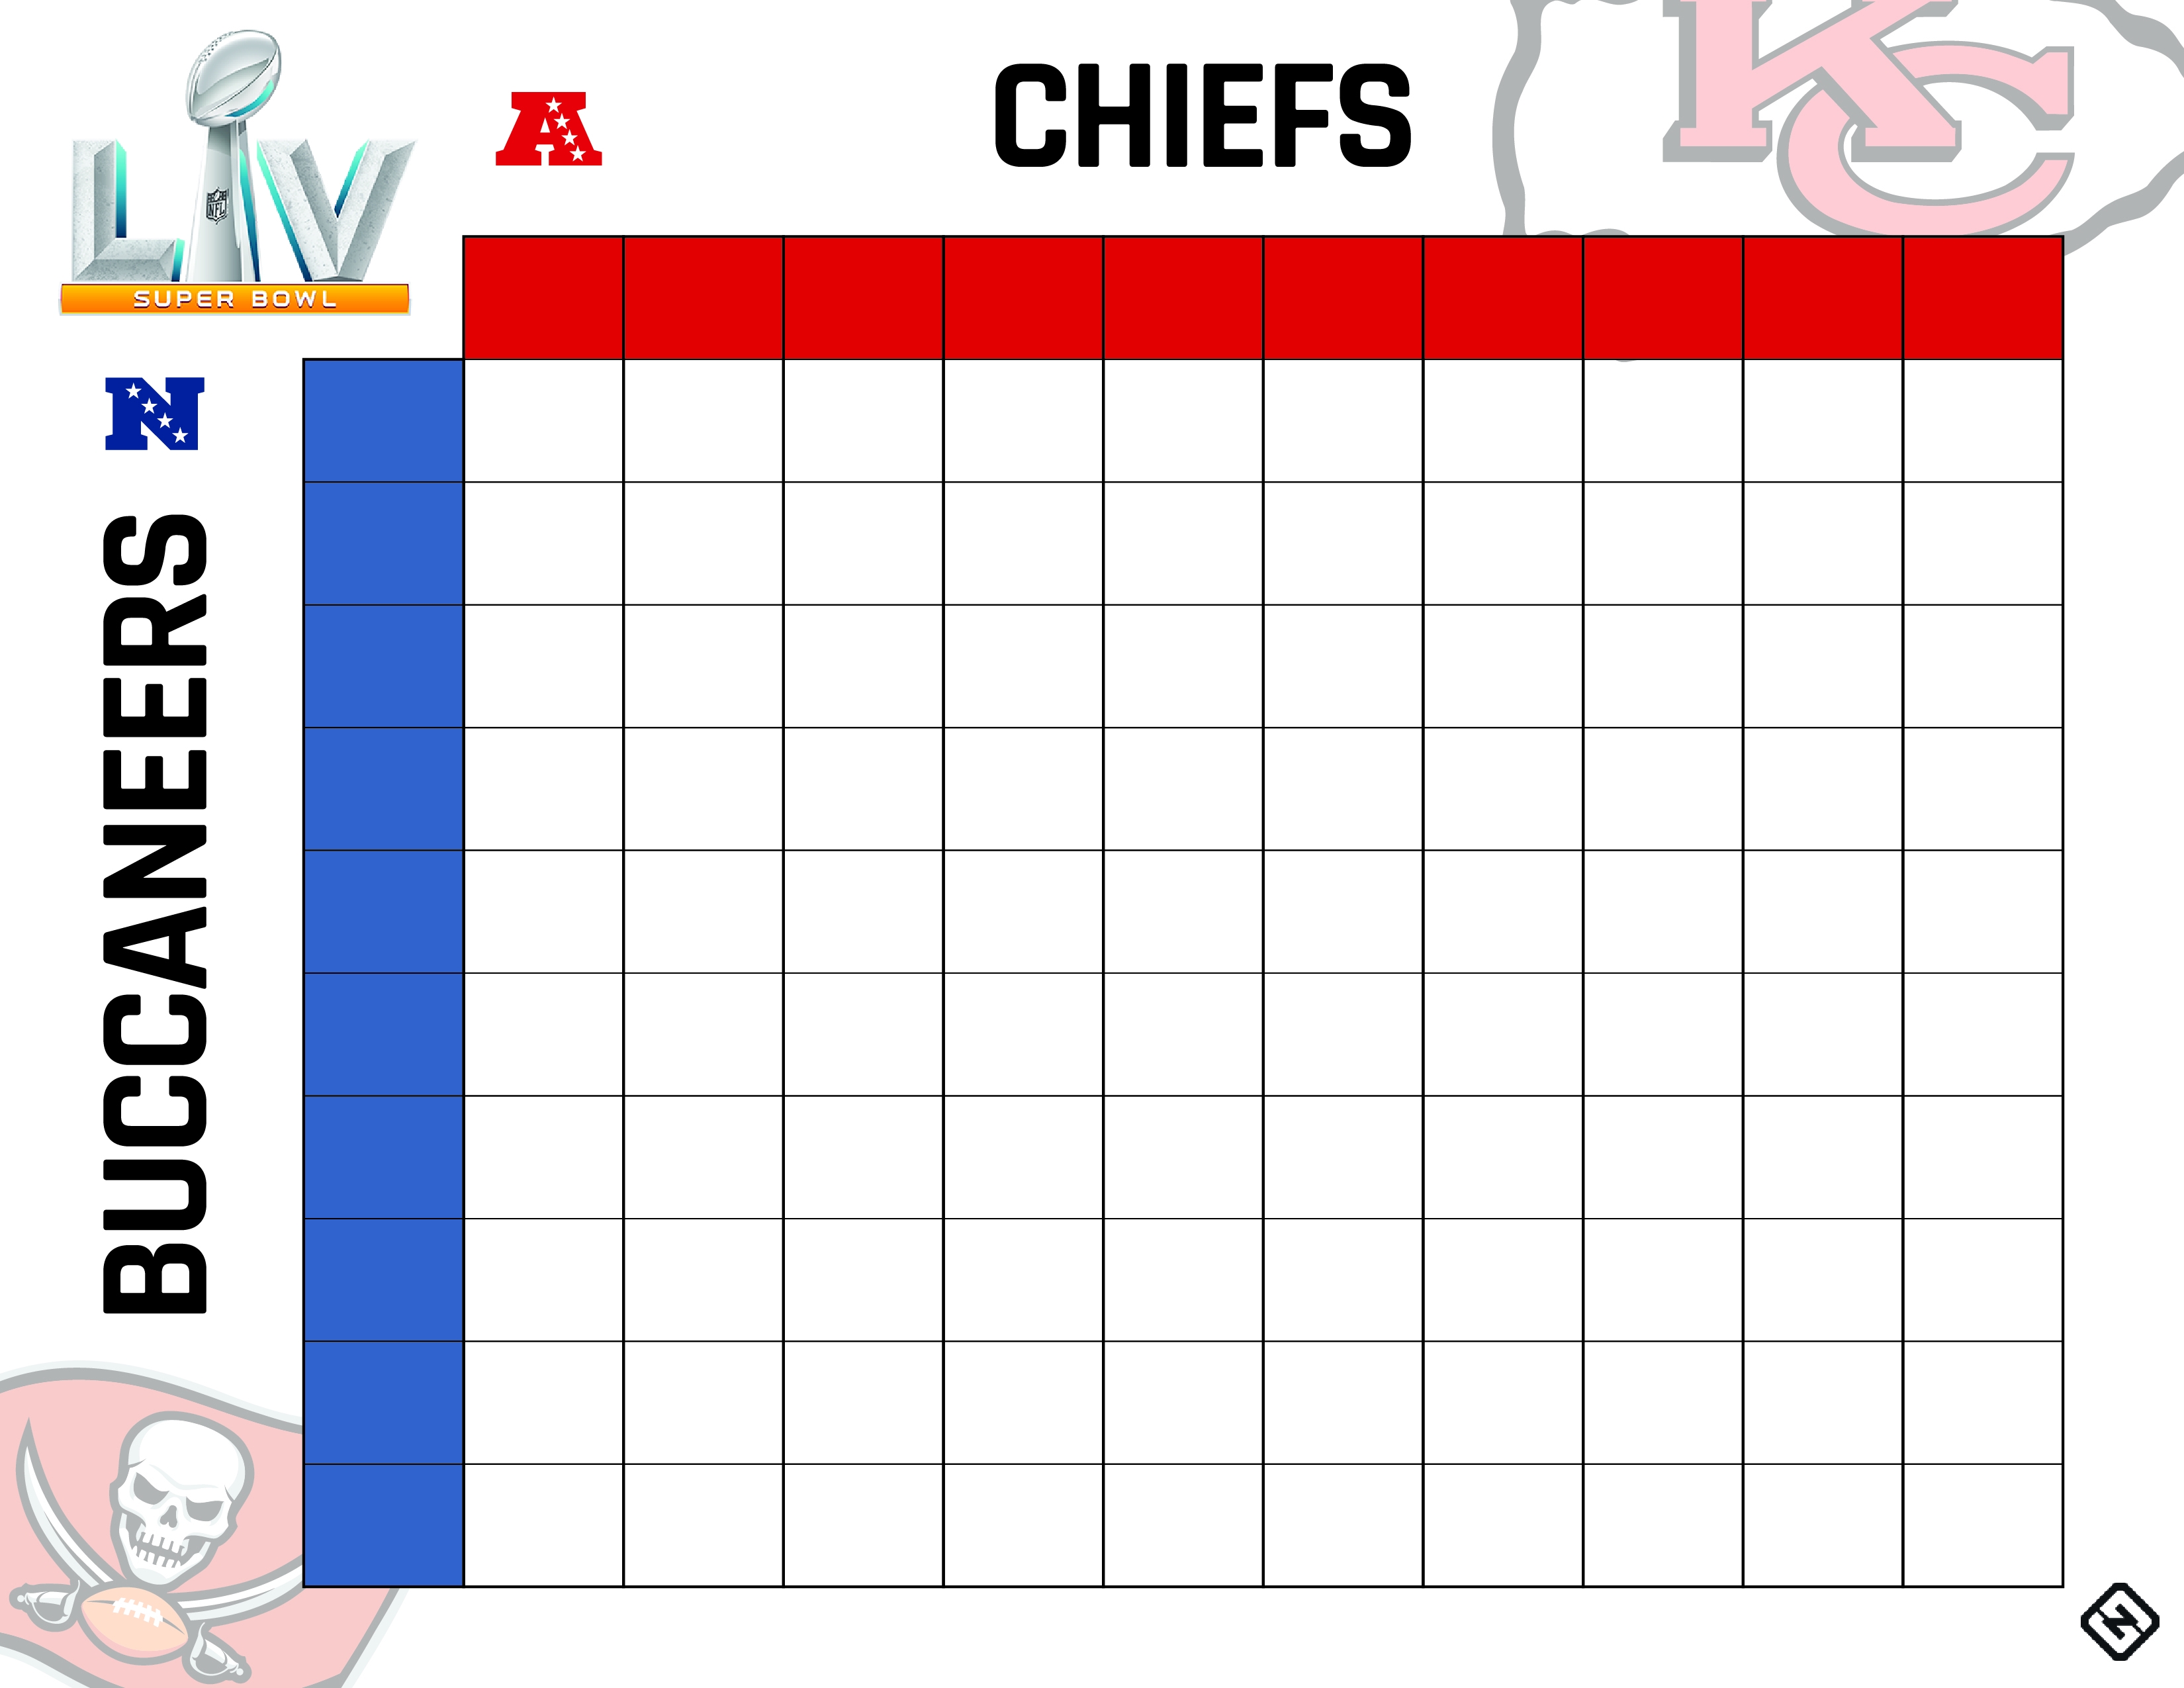 Printable Super Bowl squares grid for Chiefs vs. Buccaneers in 2021